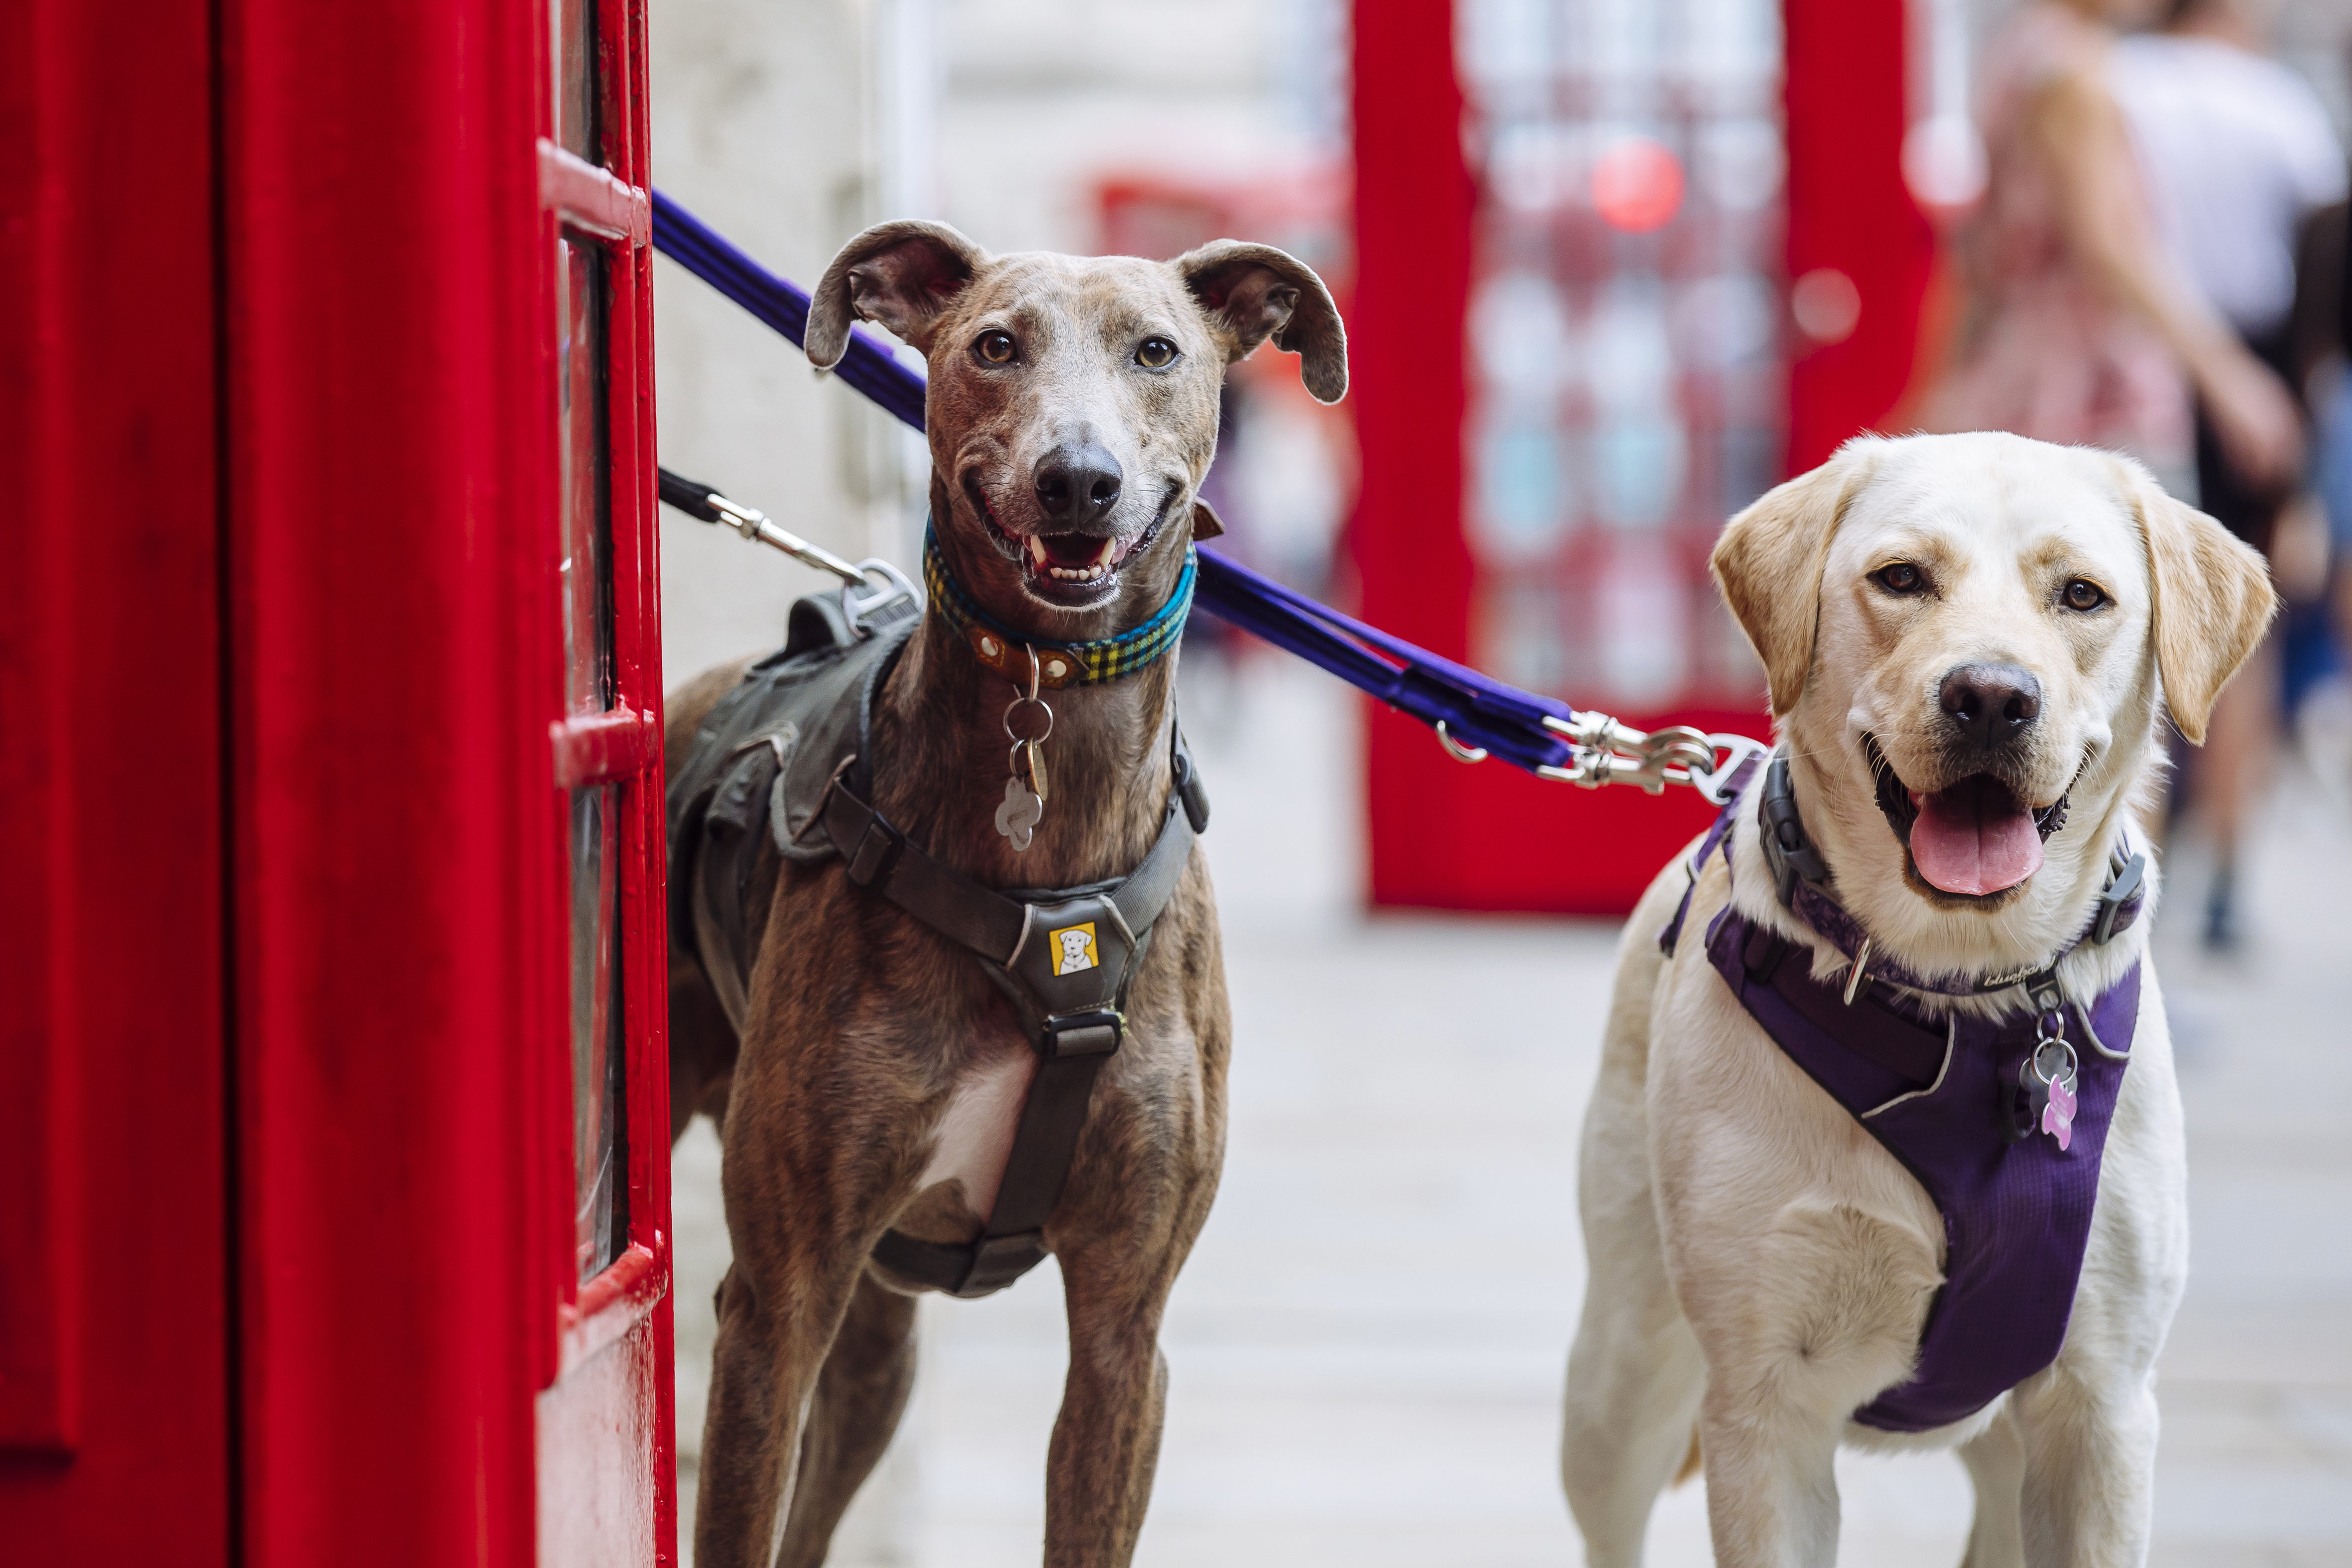 Brindle lurcher and golden Labrador side by side by a London phonebox, looking to camera